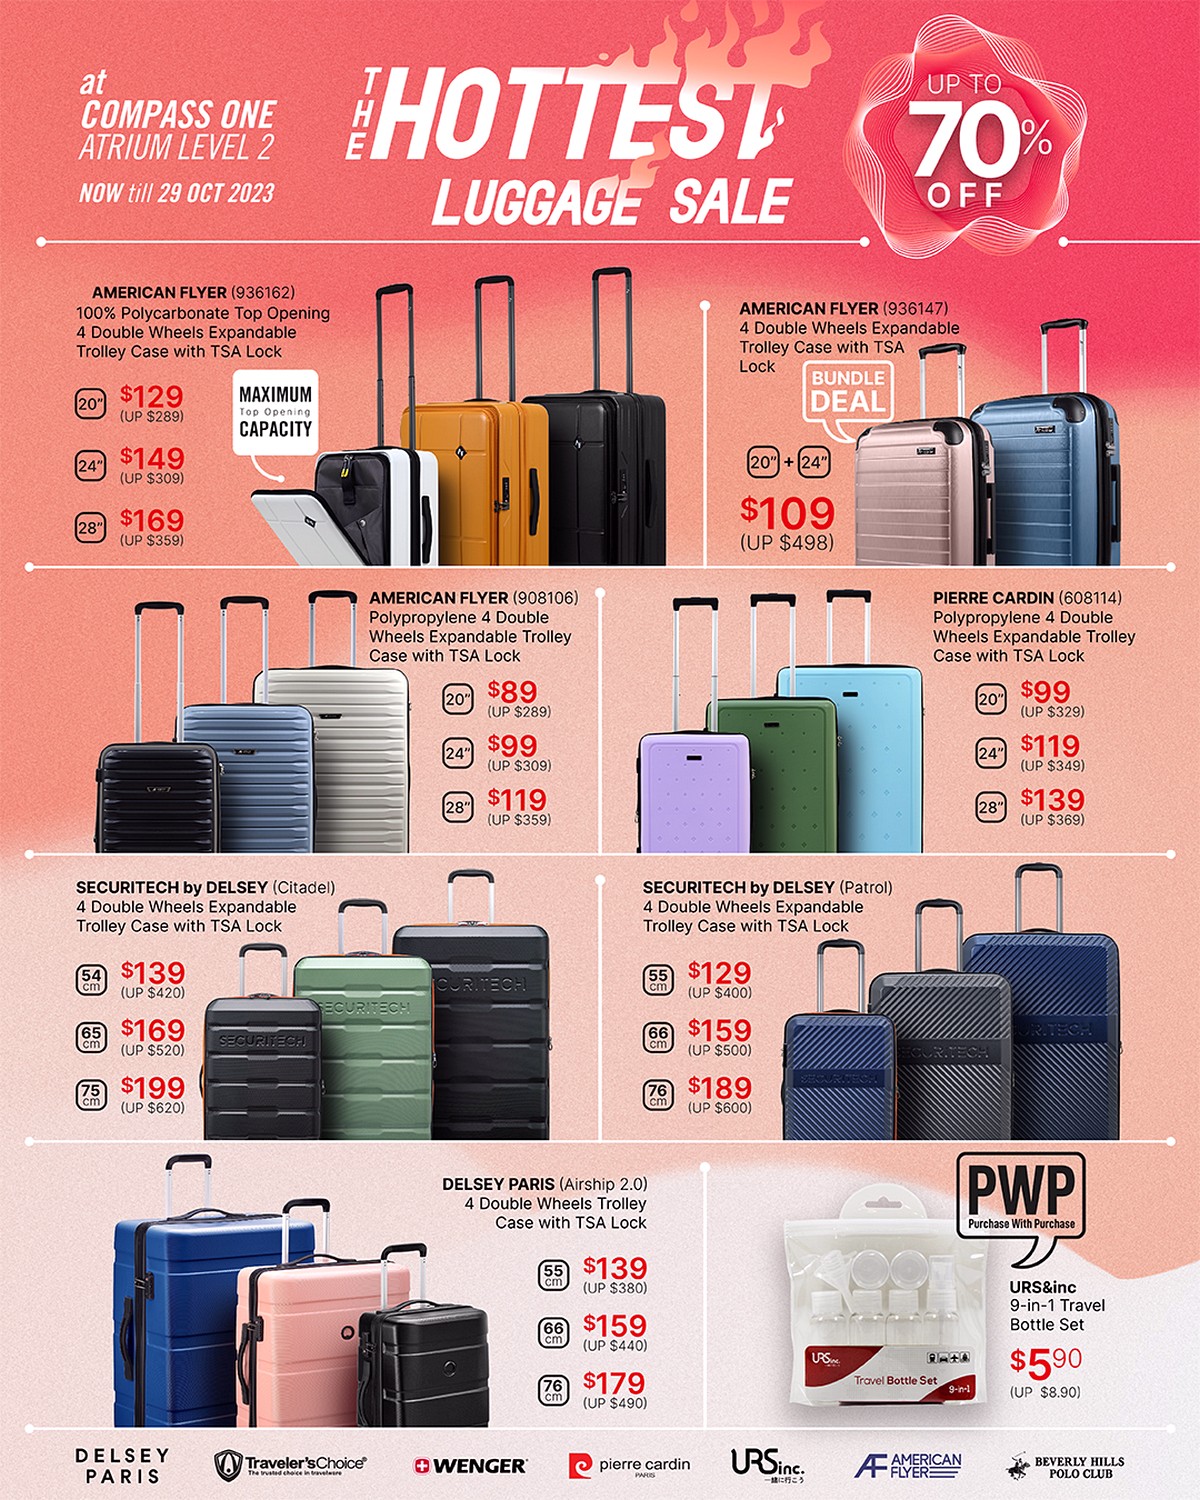 Branded-Menswear-Luggage-Warehouse-Sale-2023-Singapore-Clearance-Compass-One-012 17-29 Oct 2023: Branded Luggage & Travel Bags Atrium Sale! Up to 70% OFF at Compass One